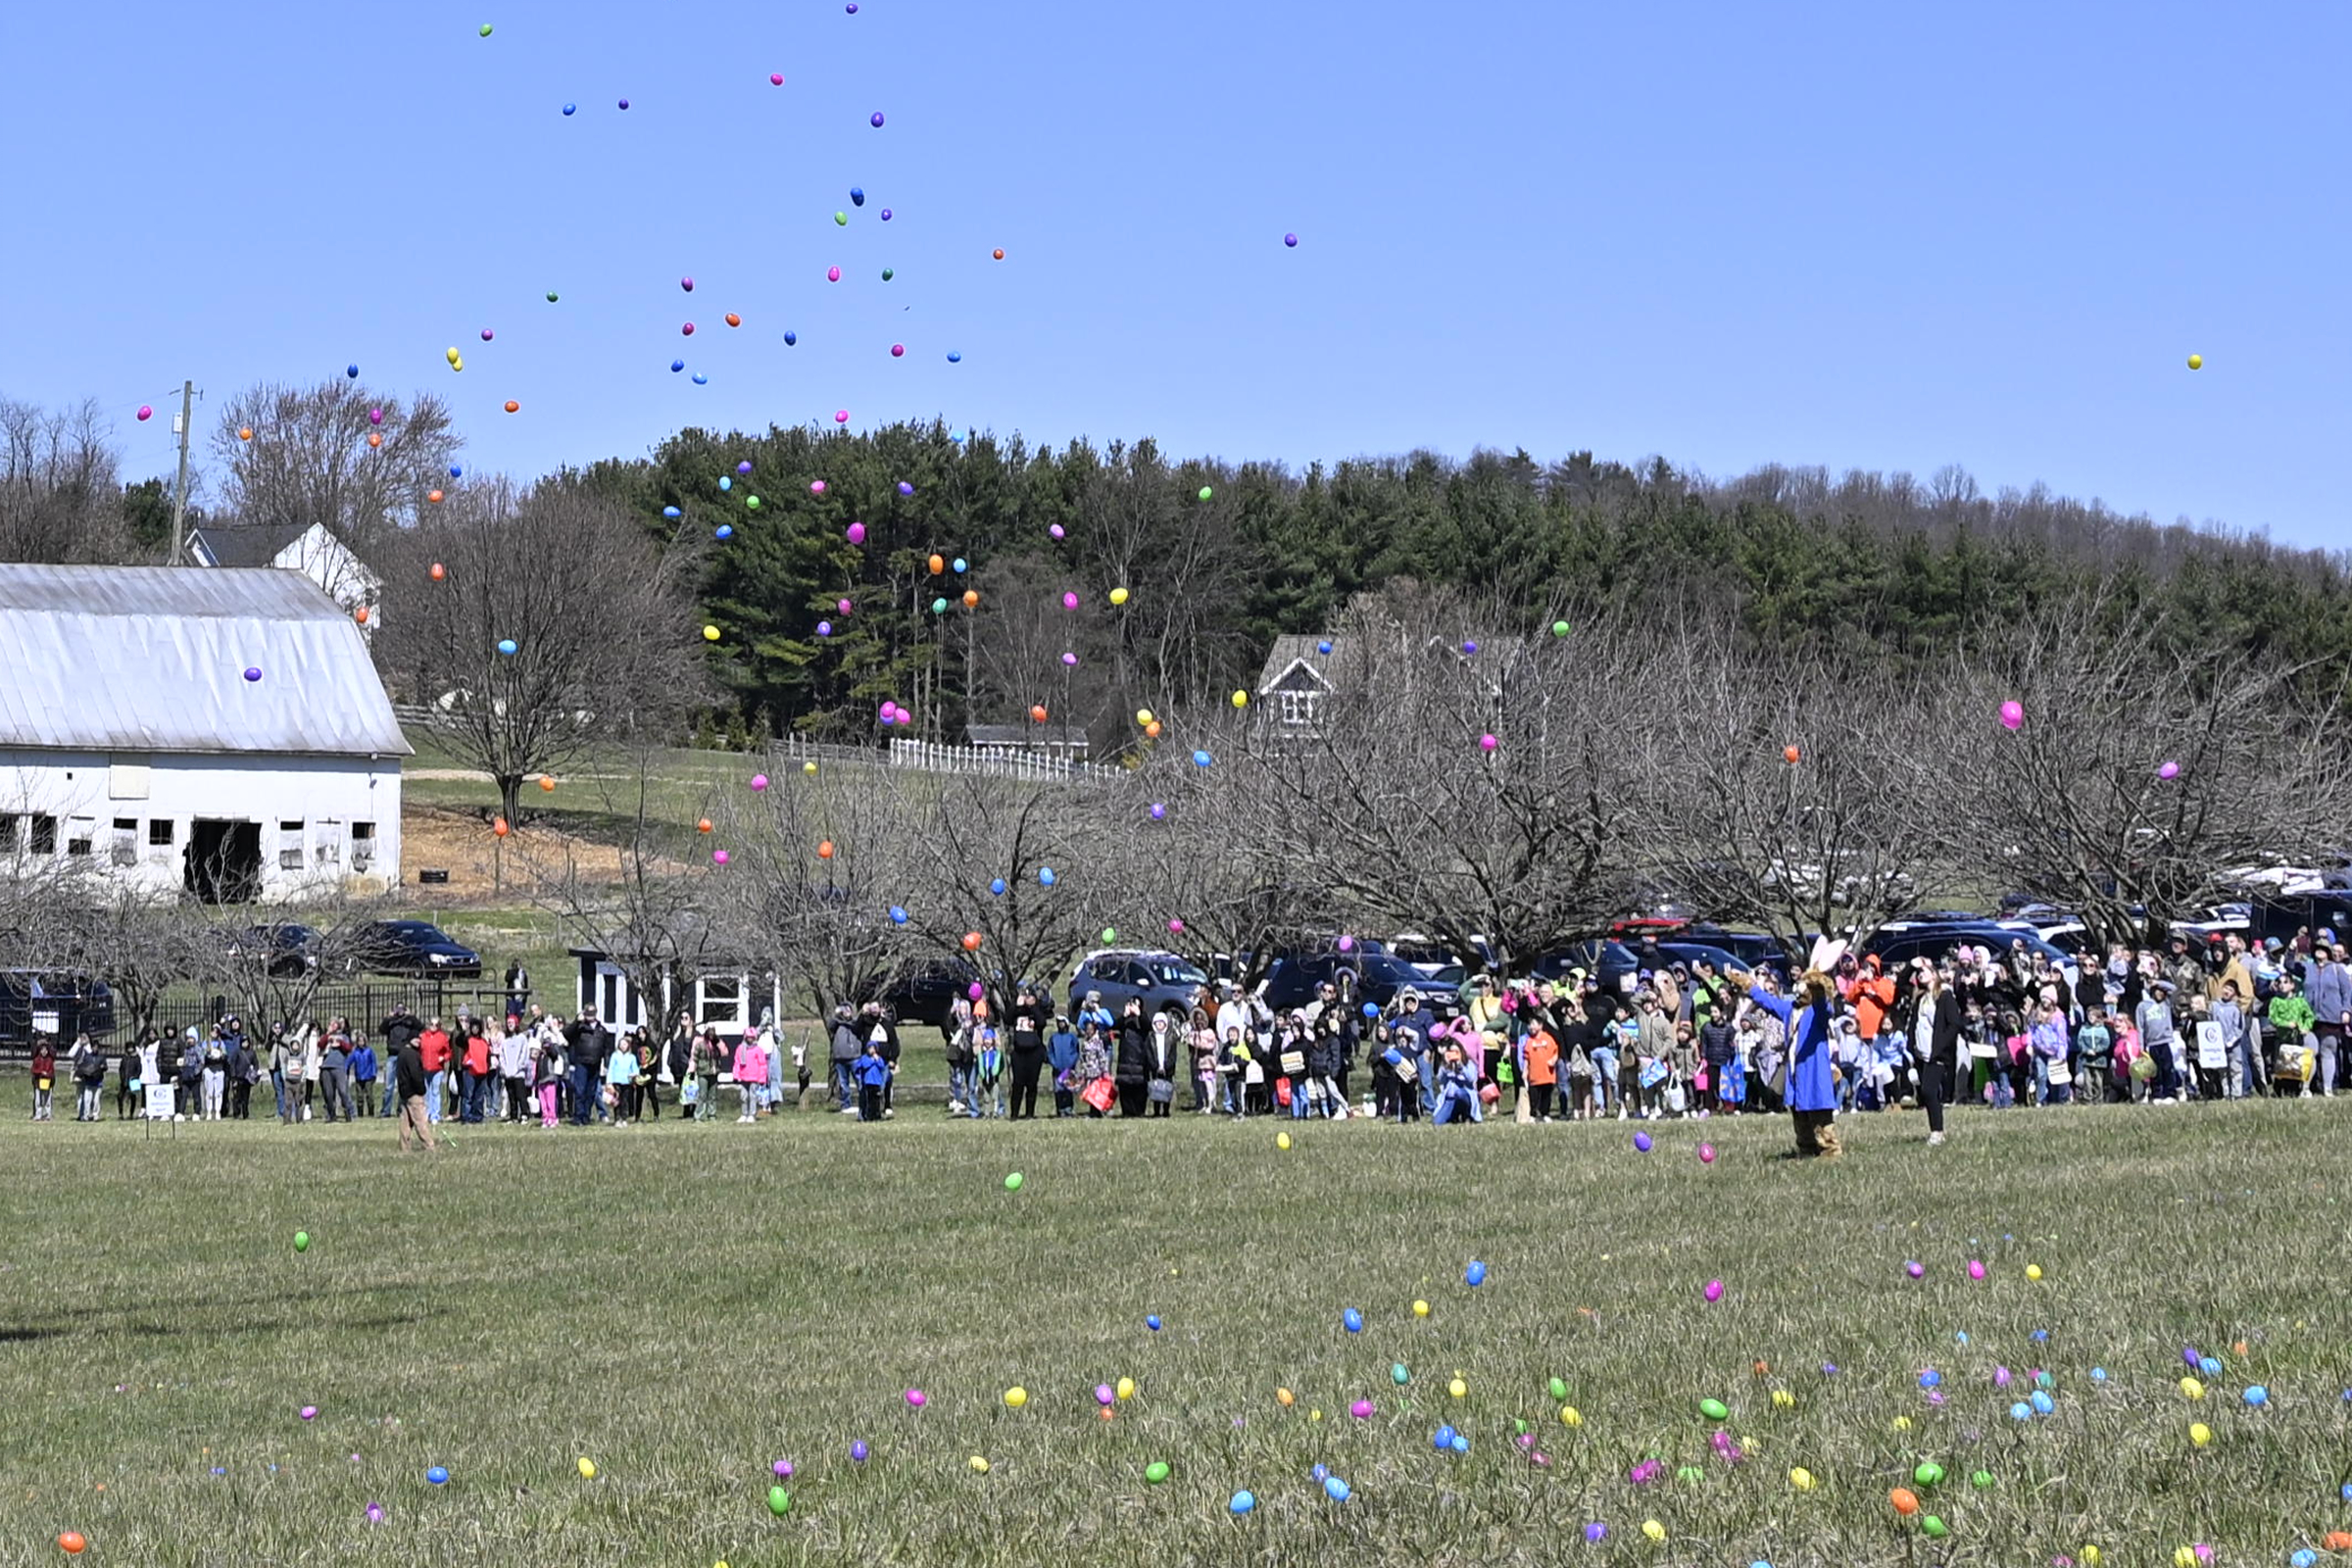 Easter eggs rain down from the sky as crowds await the hunt during the Coppermine Eggstravaganza at Cascade Park in Hampstead. (Thomas Walker/Freelance)